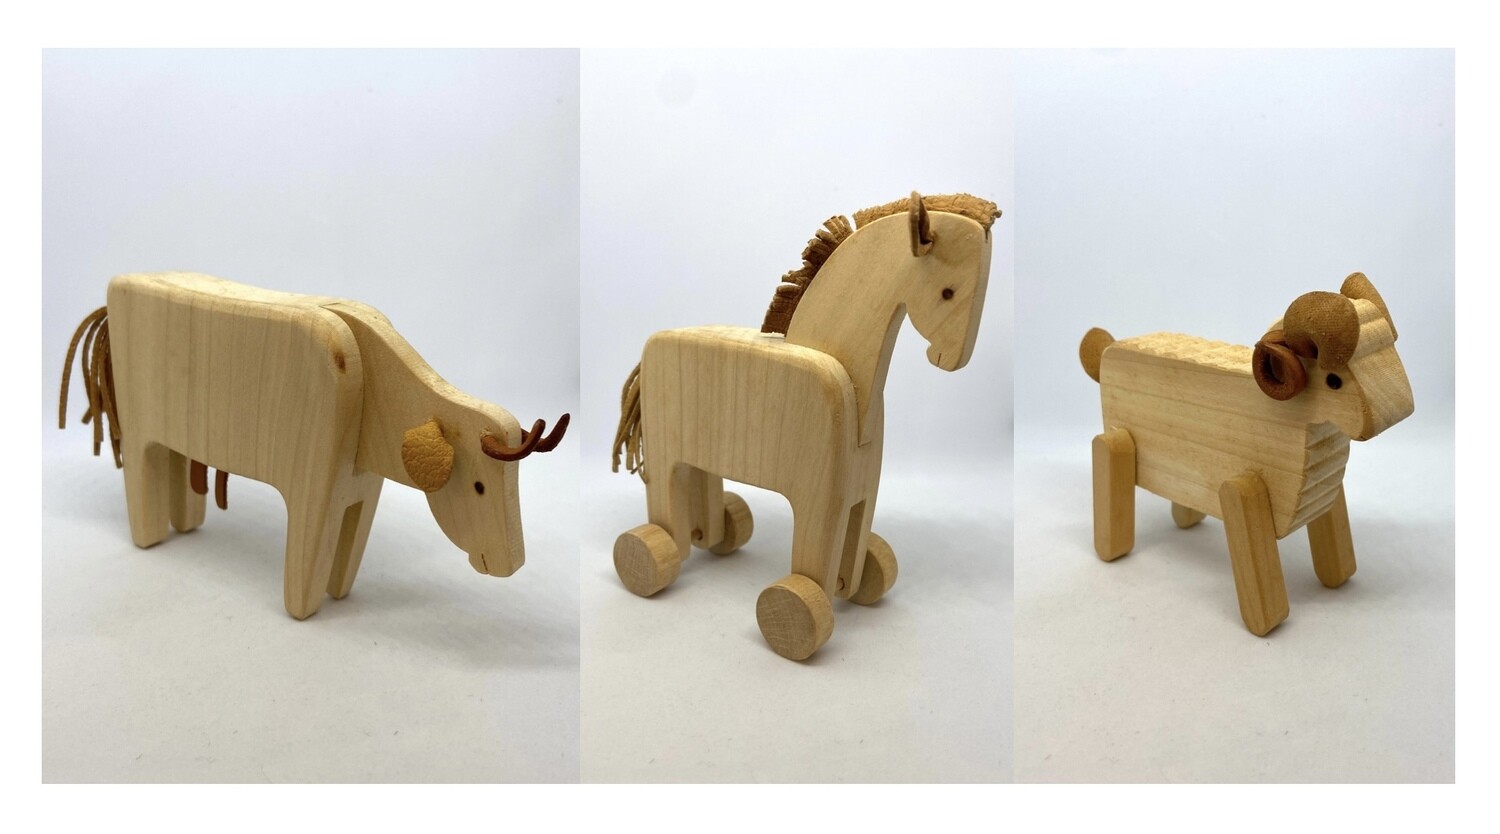 Set of 3 - Wooden and Leather Handcrafted Toy Animals 4"